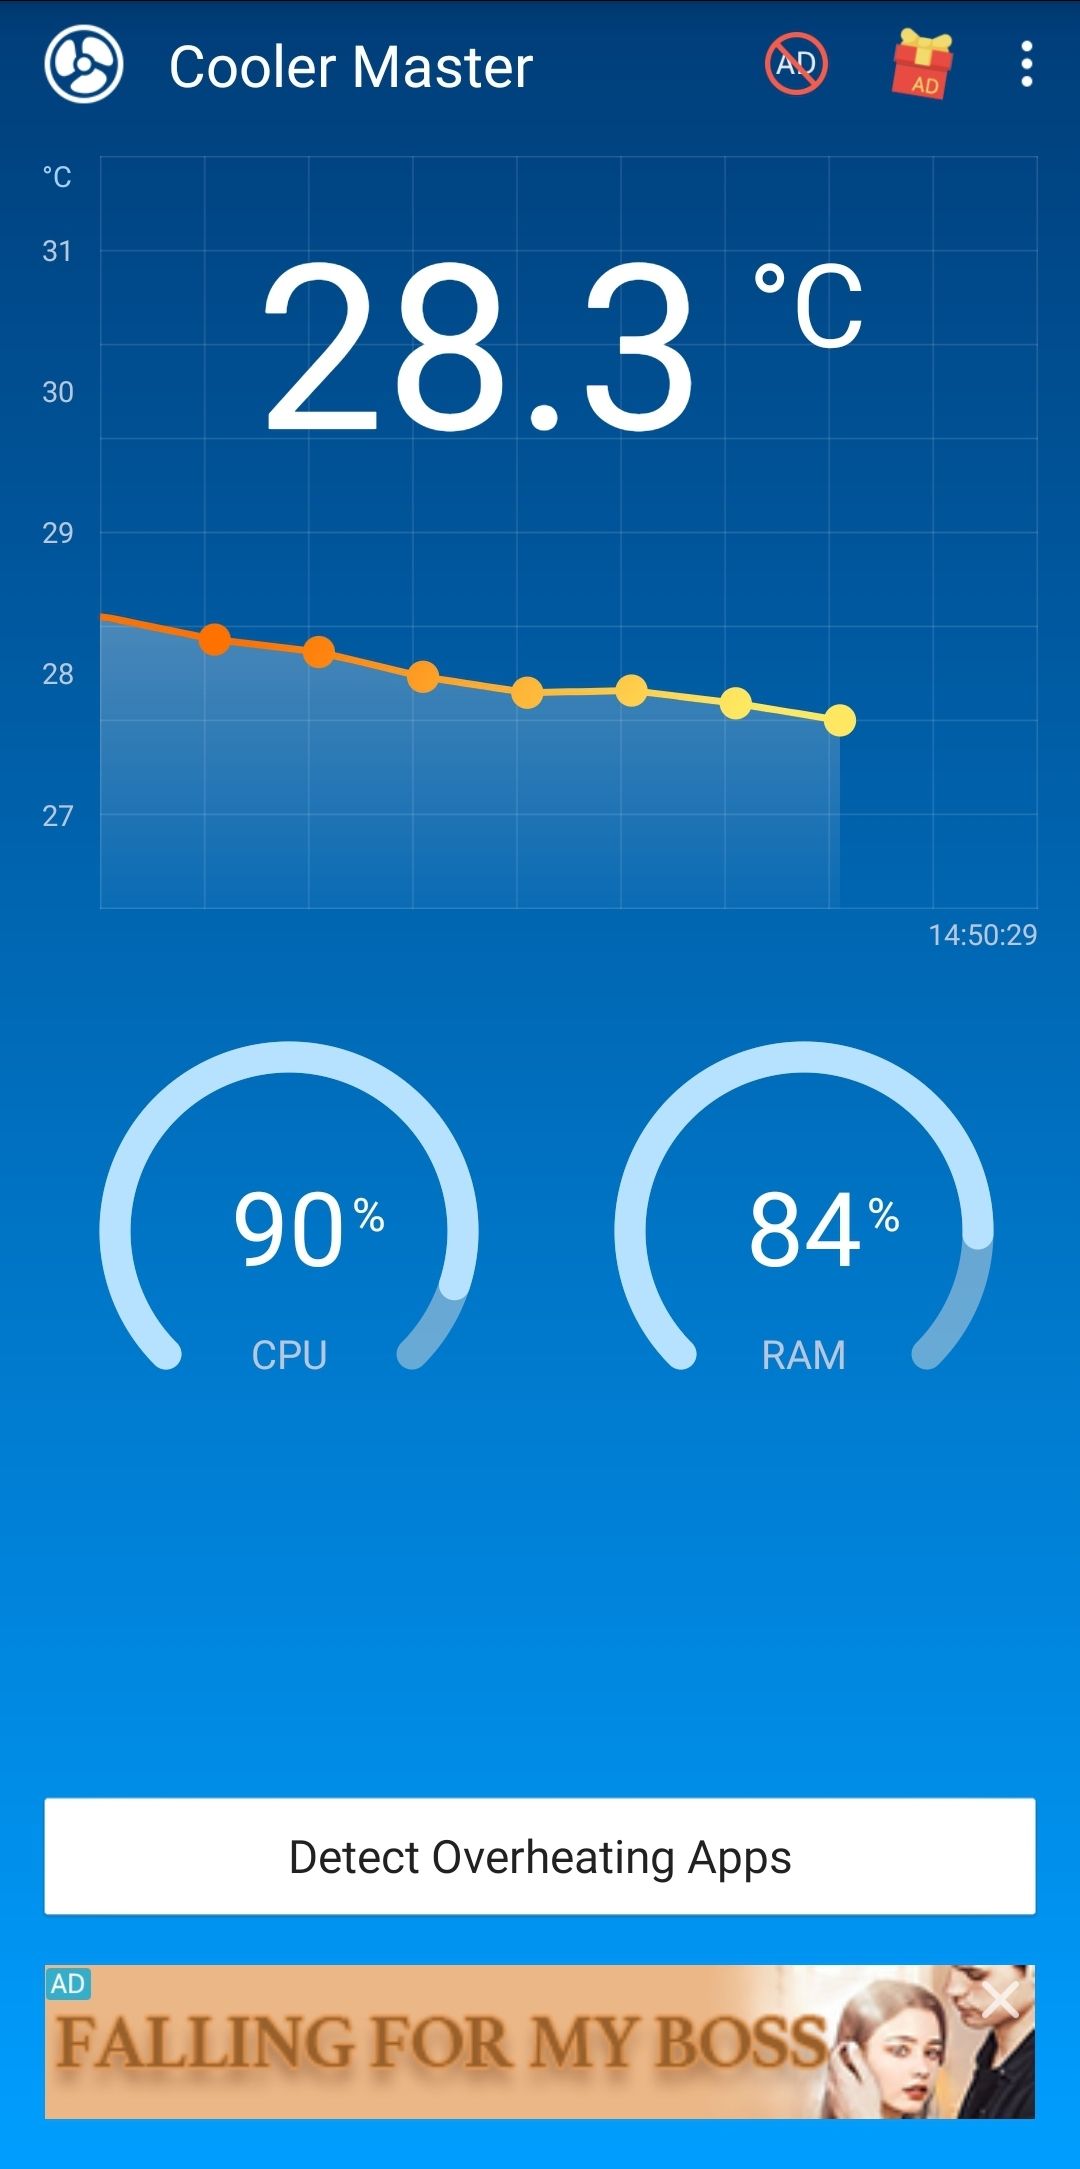 The Cooling Master home screen, showing a live read of temperature and device functions